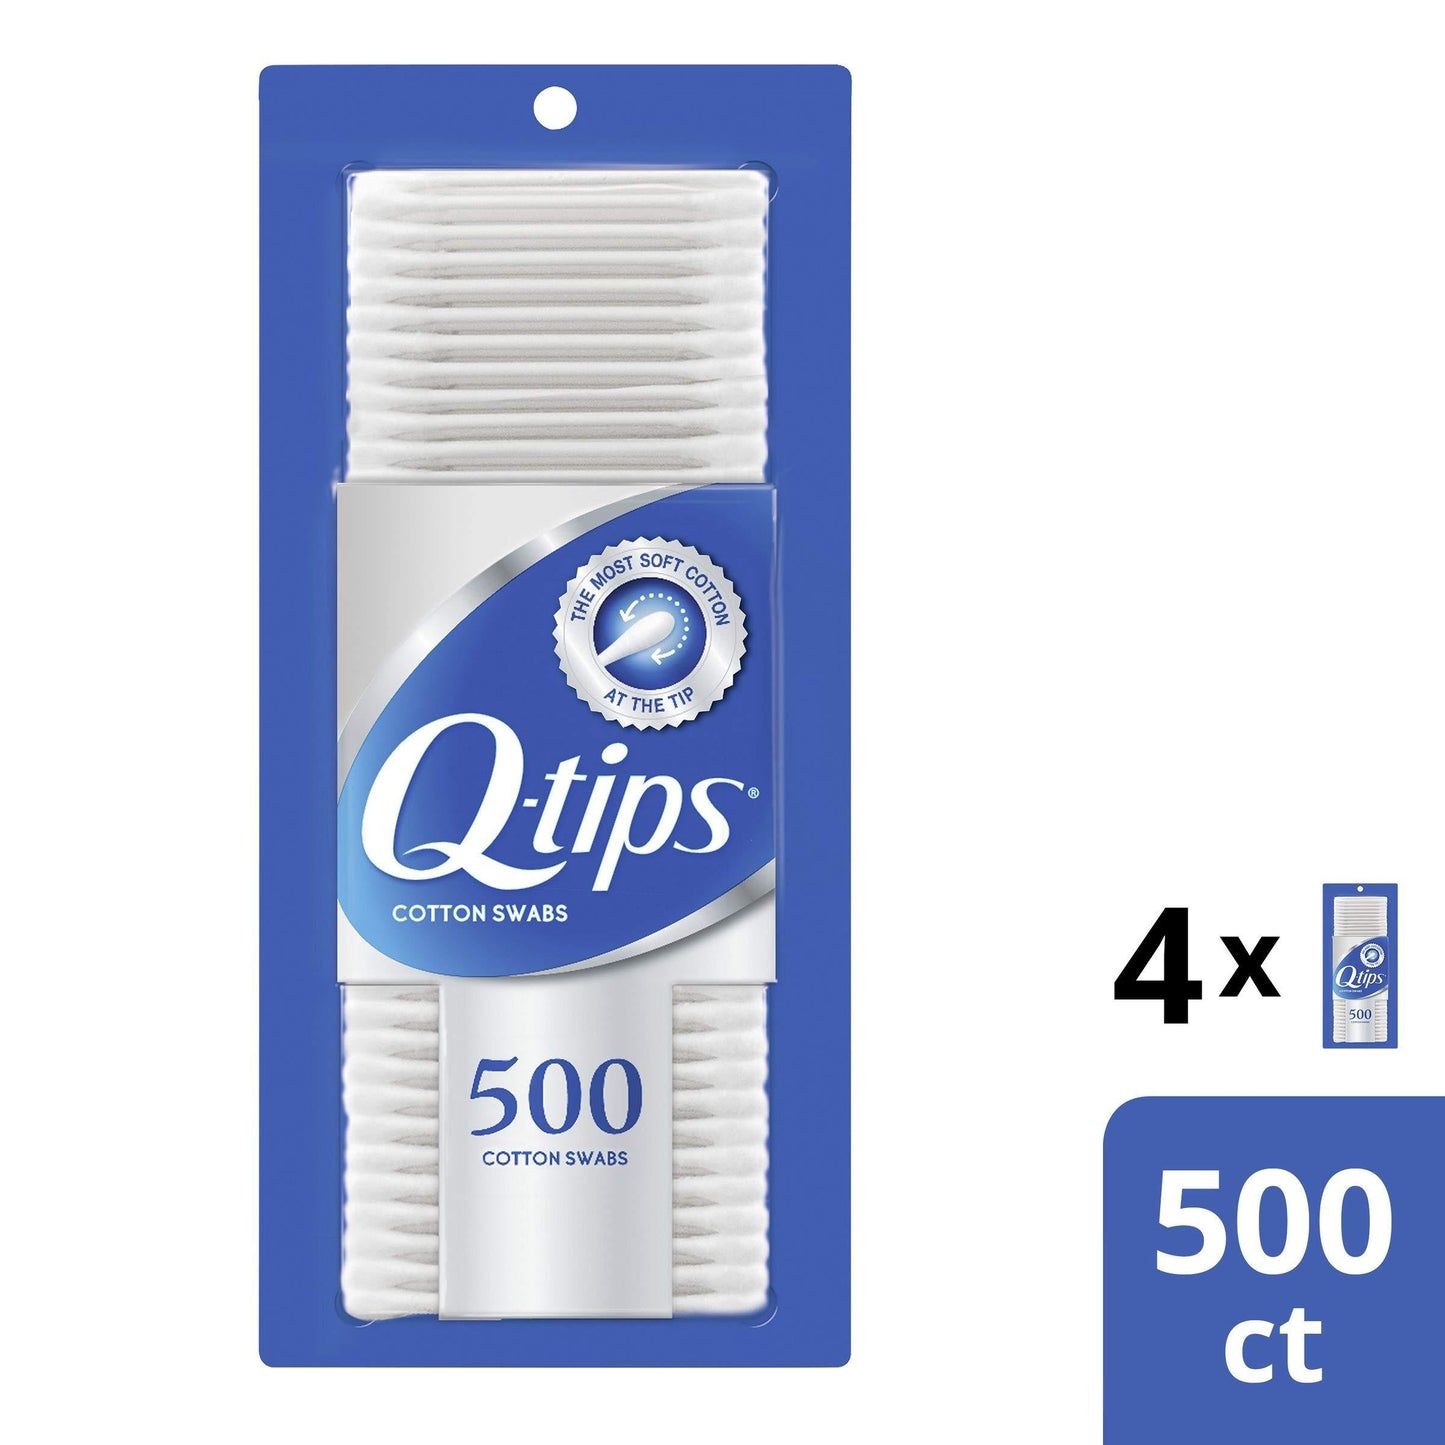 Q-Tips Swabs Cotton, 500 Count Pack of 4